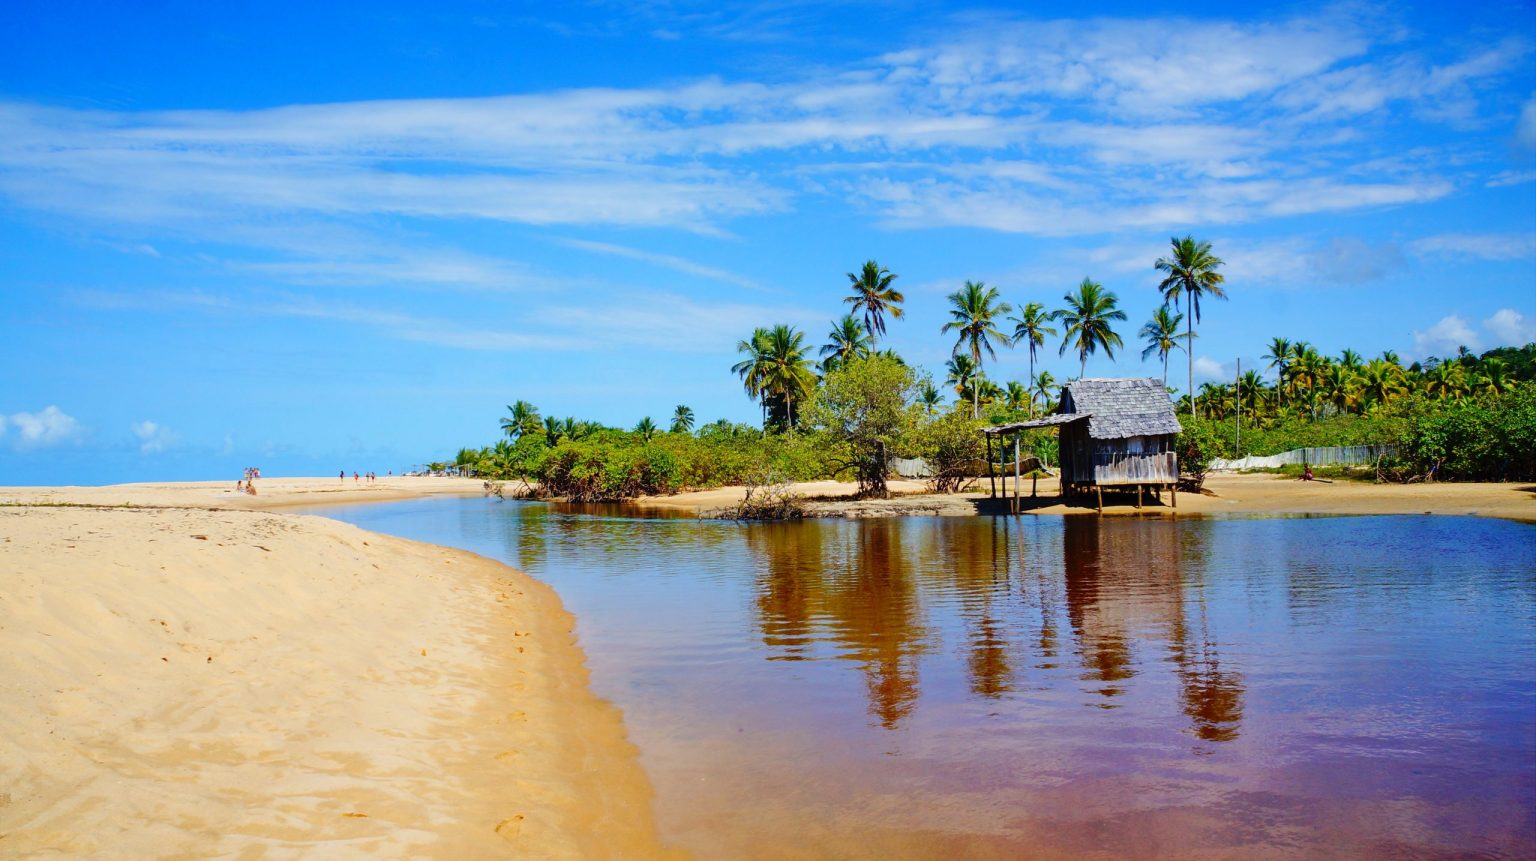 Old,Fishermen’s,House,On,The,River,At,Beautiful,Sandy,Beach